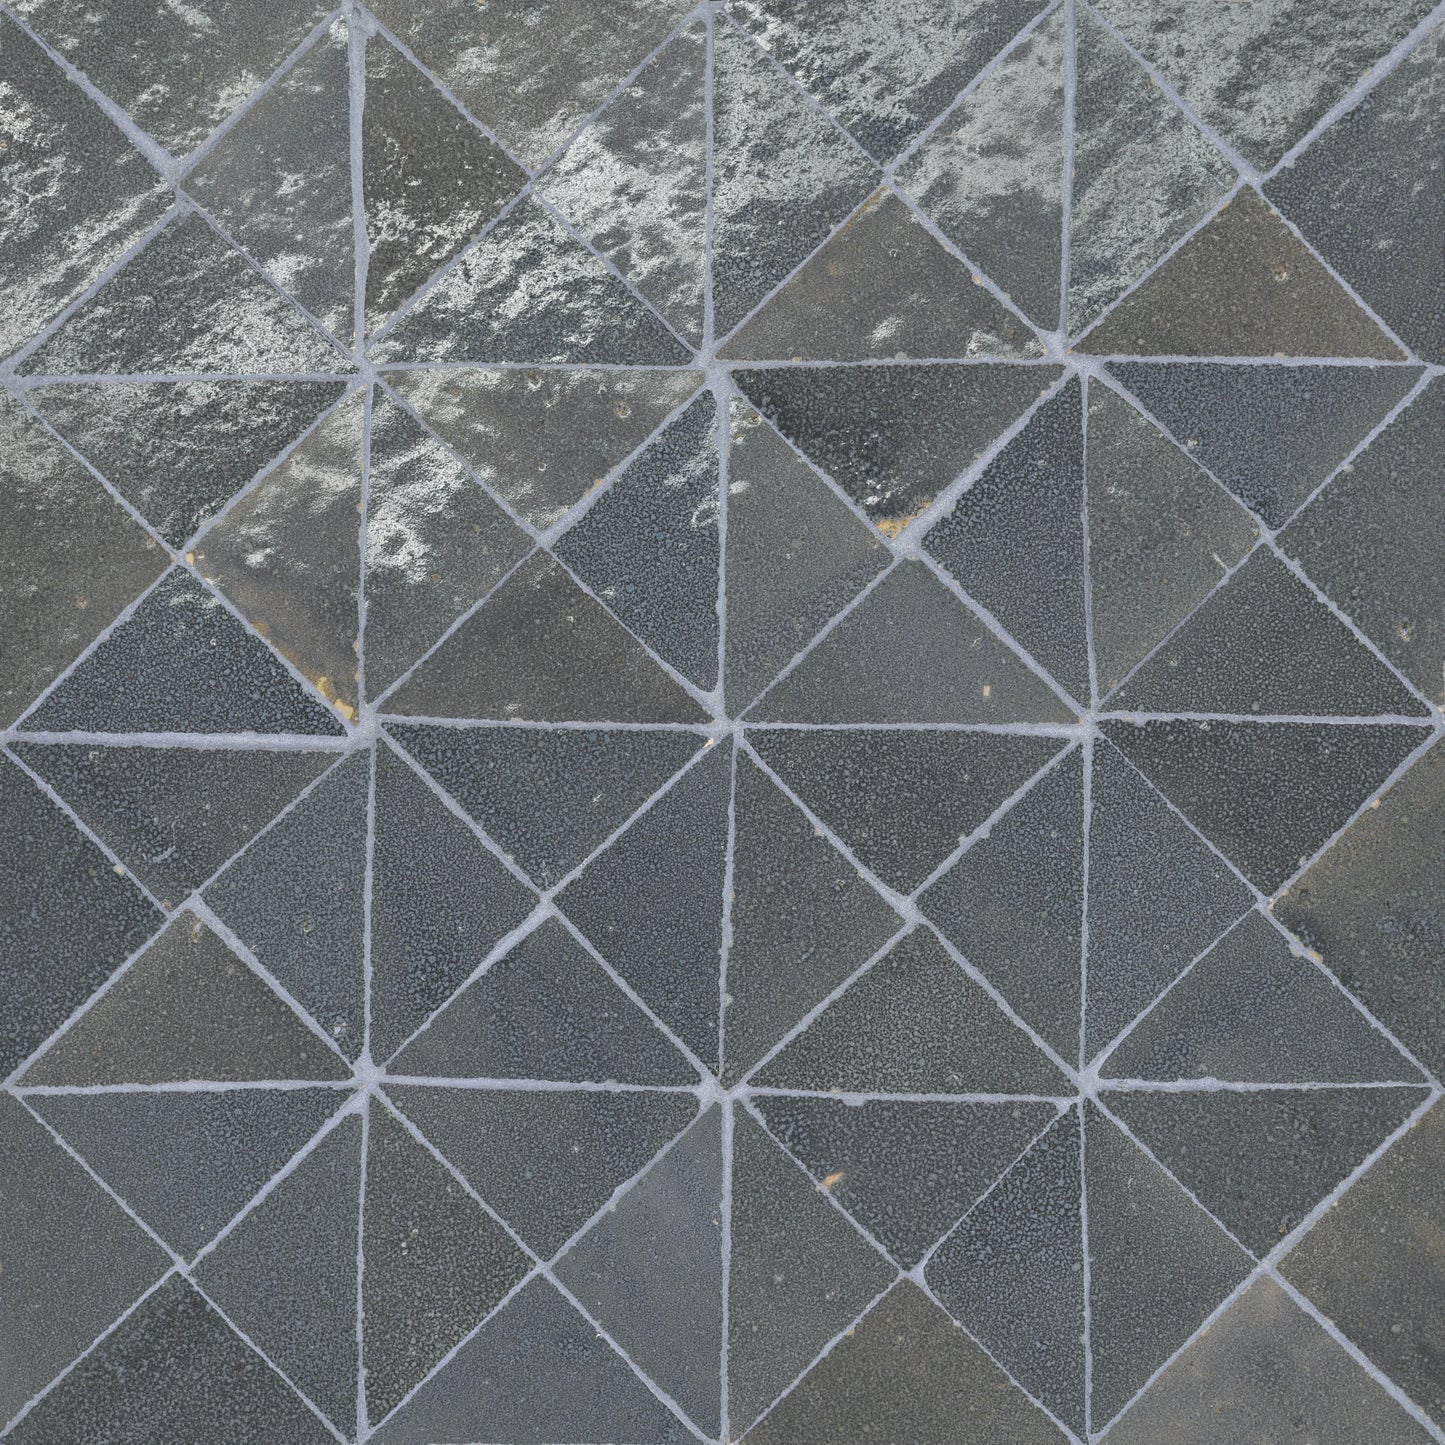 Tunis Triangle Zellige Tile Glossy in Graphite